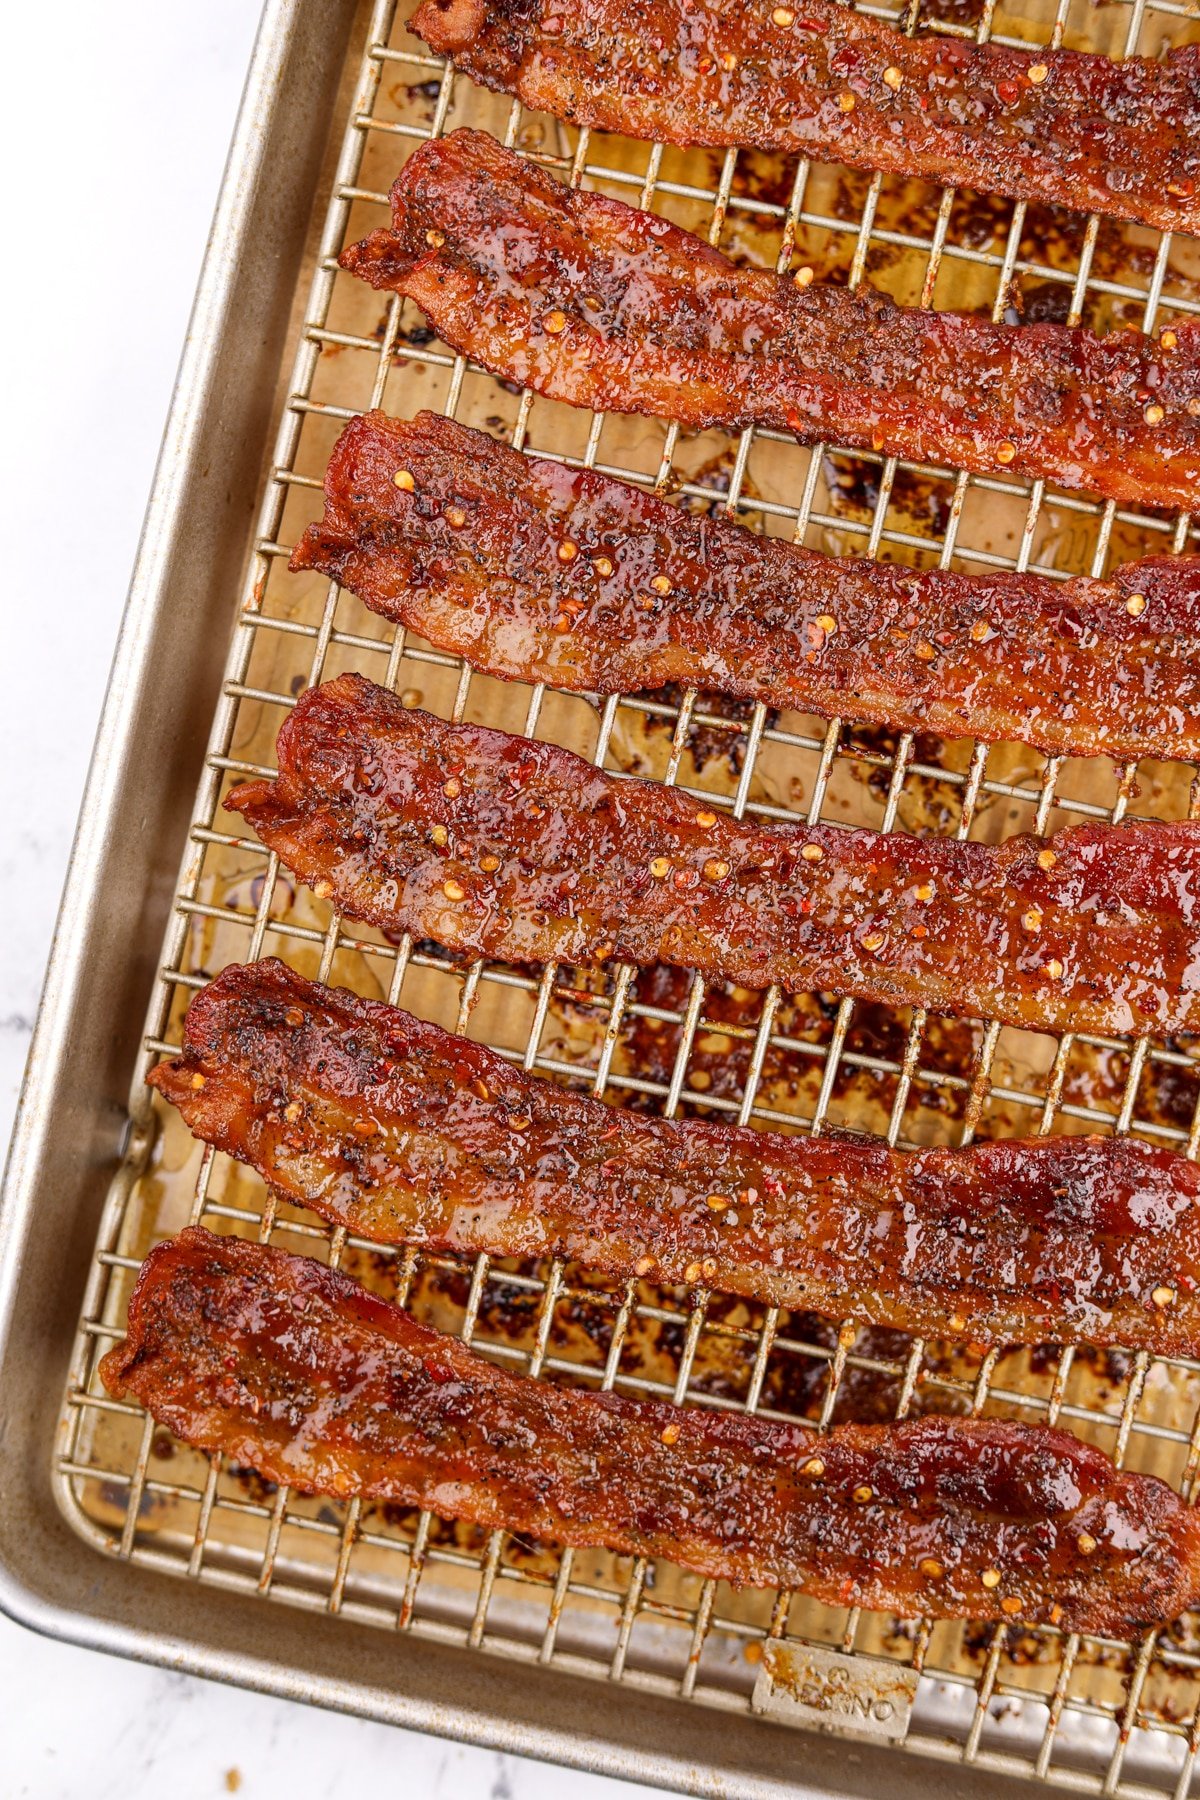 Crispy bacon on a wire rack that's been cooked with brown sugar and crushed chilies.